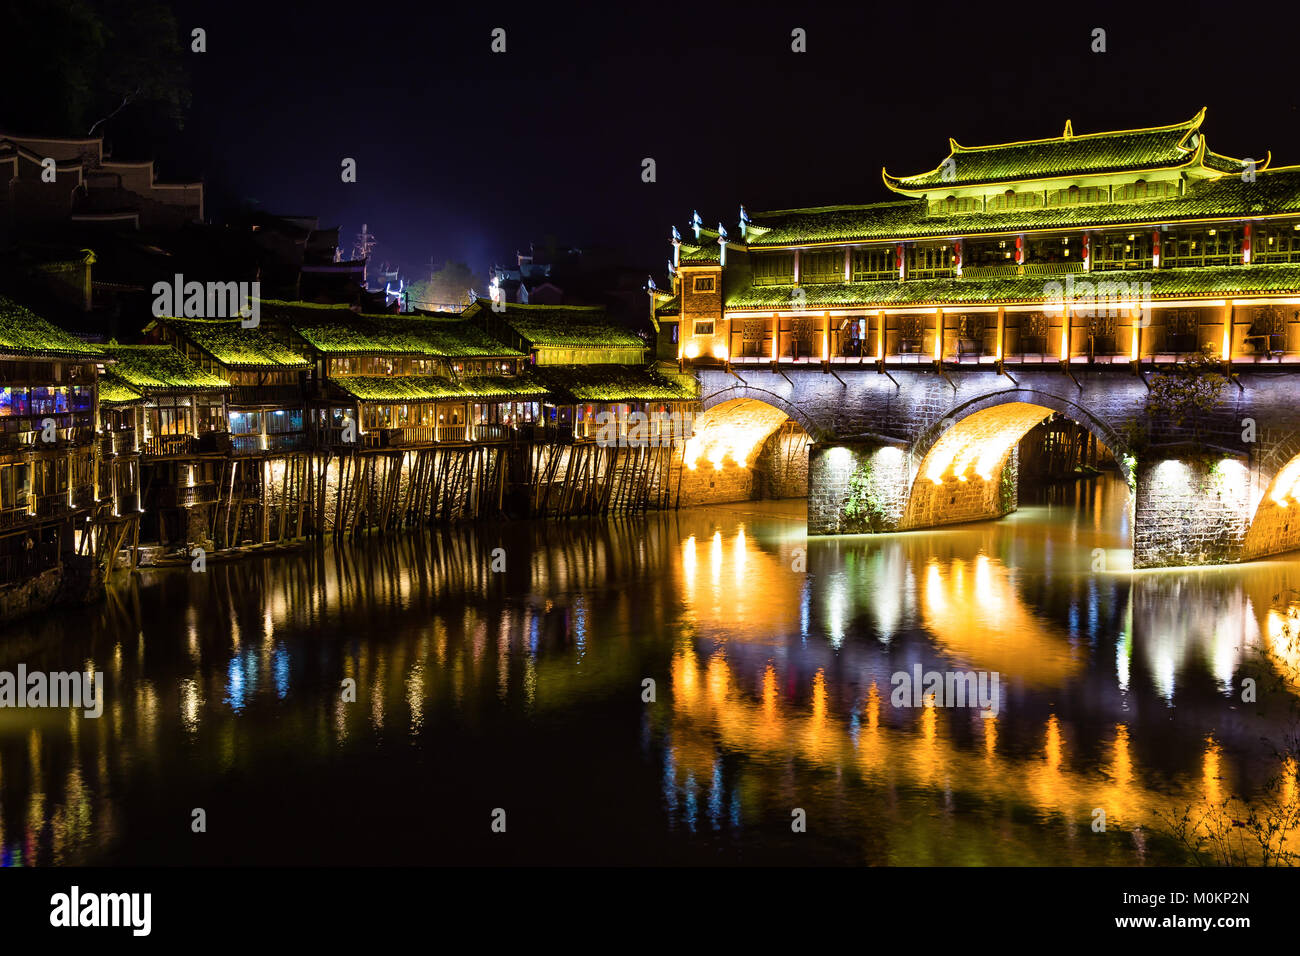 Hong Bridge at night in Fenghuang Ancient town, Hunan province, China. This ancient town was added to the UNESCO World Heritage Tentative List in the  Stock Photo